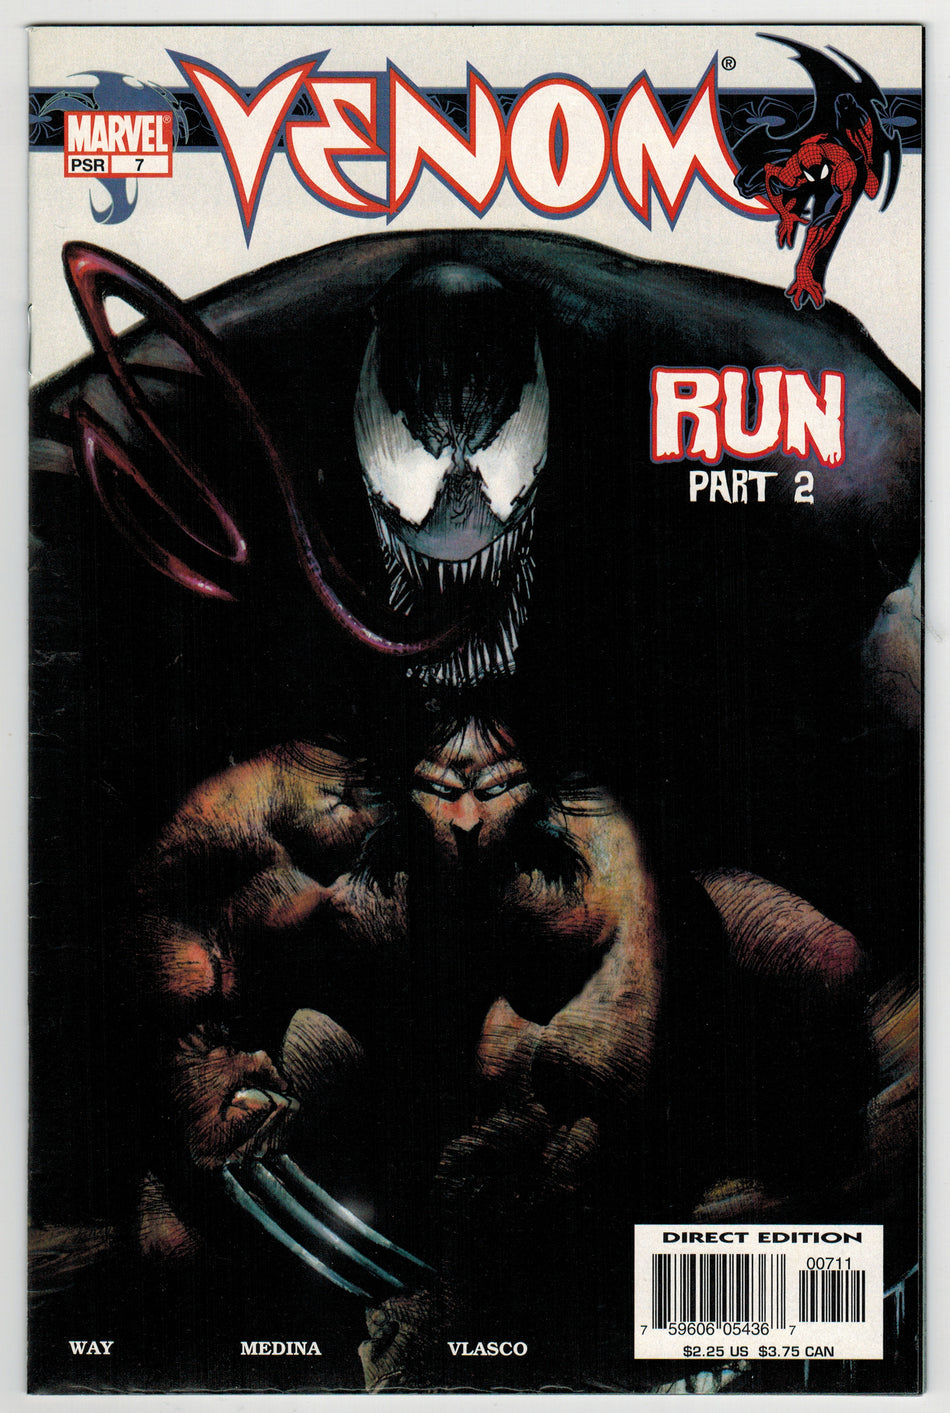 Photo of Venom, Vol. 1 (2003) Issue 7 - Very Fine Comic sold by Stronghold Collectibles